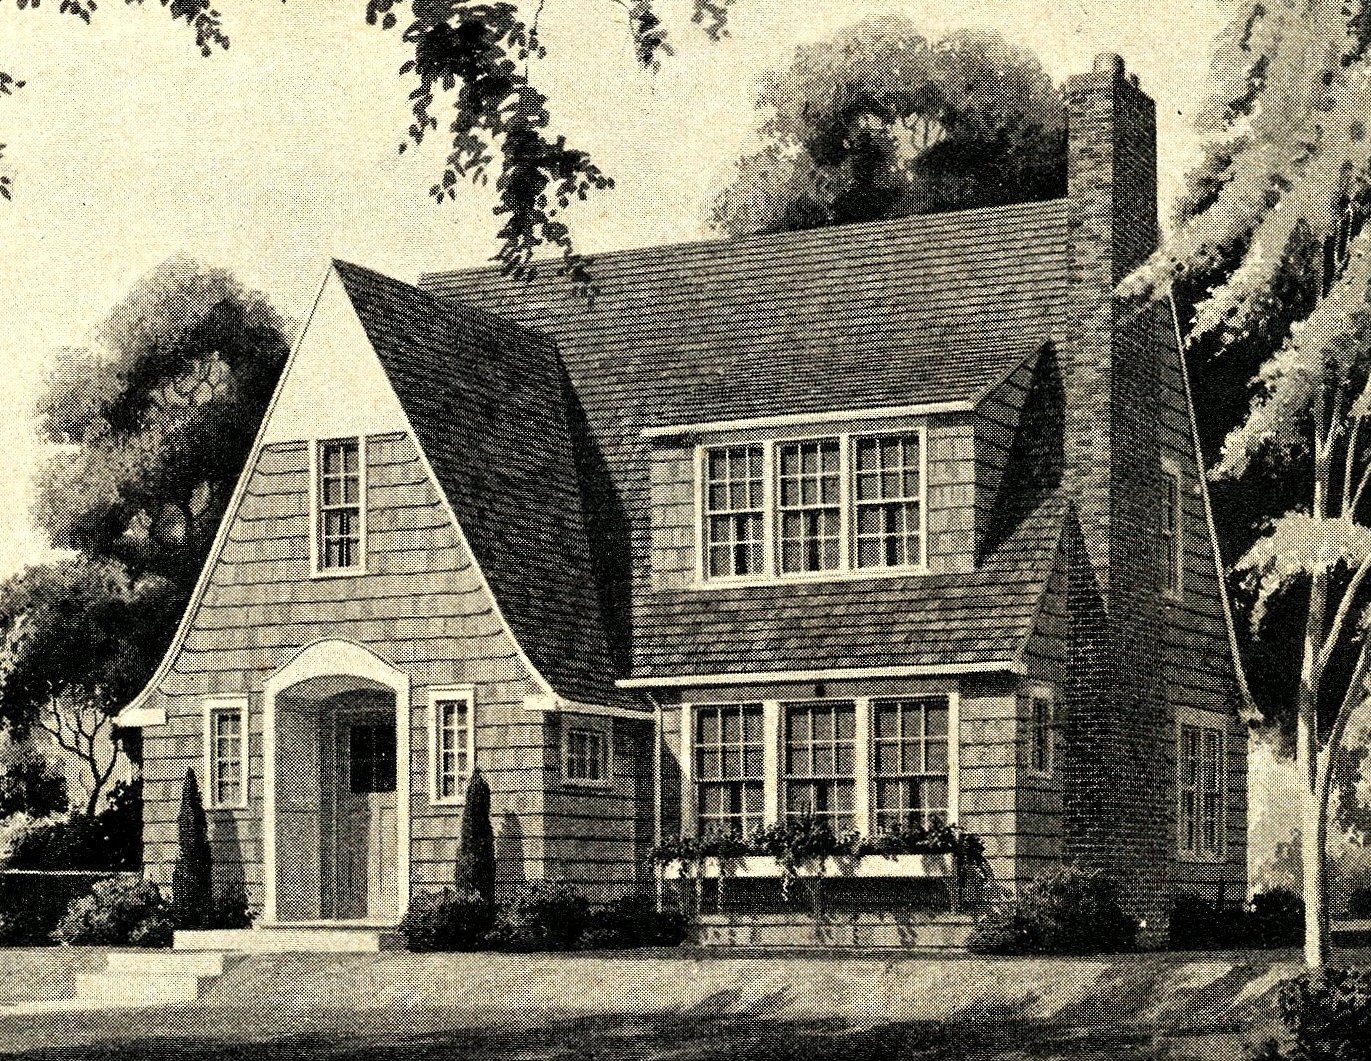 This is a Sears Lynnhaven (from the 1938 catalog). 